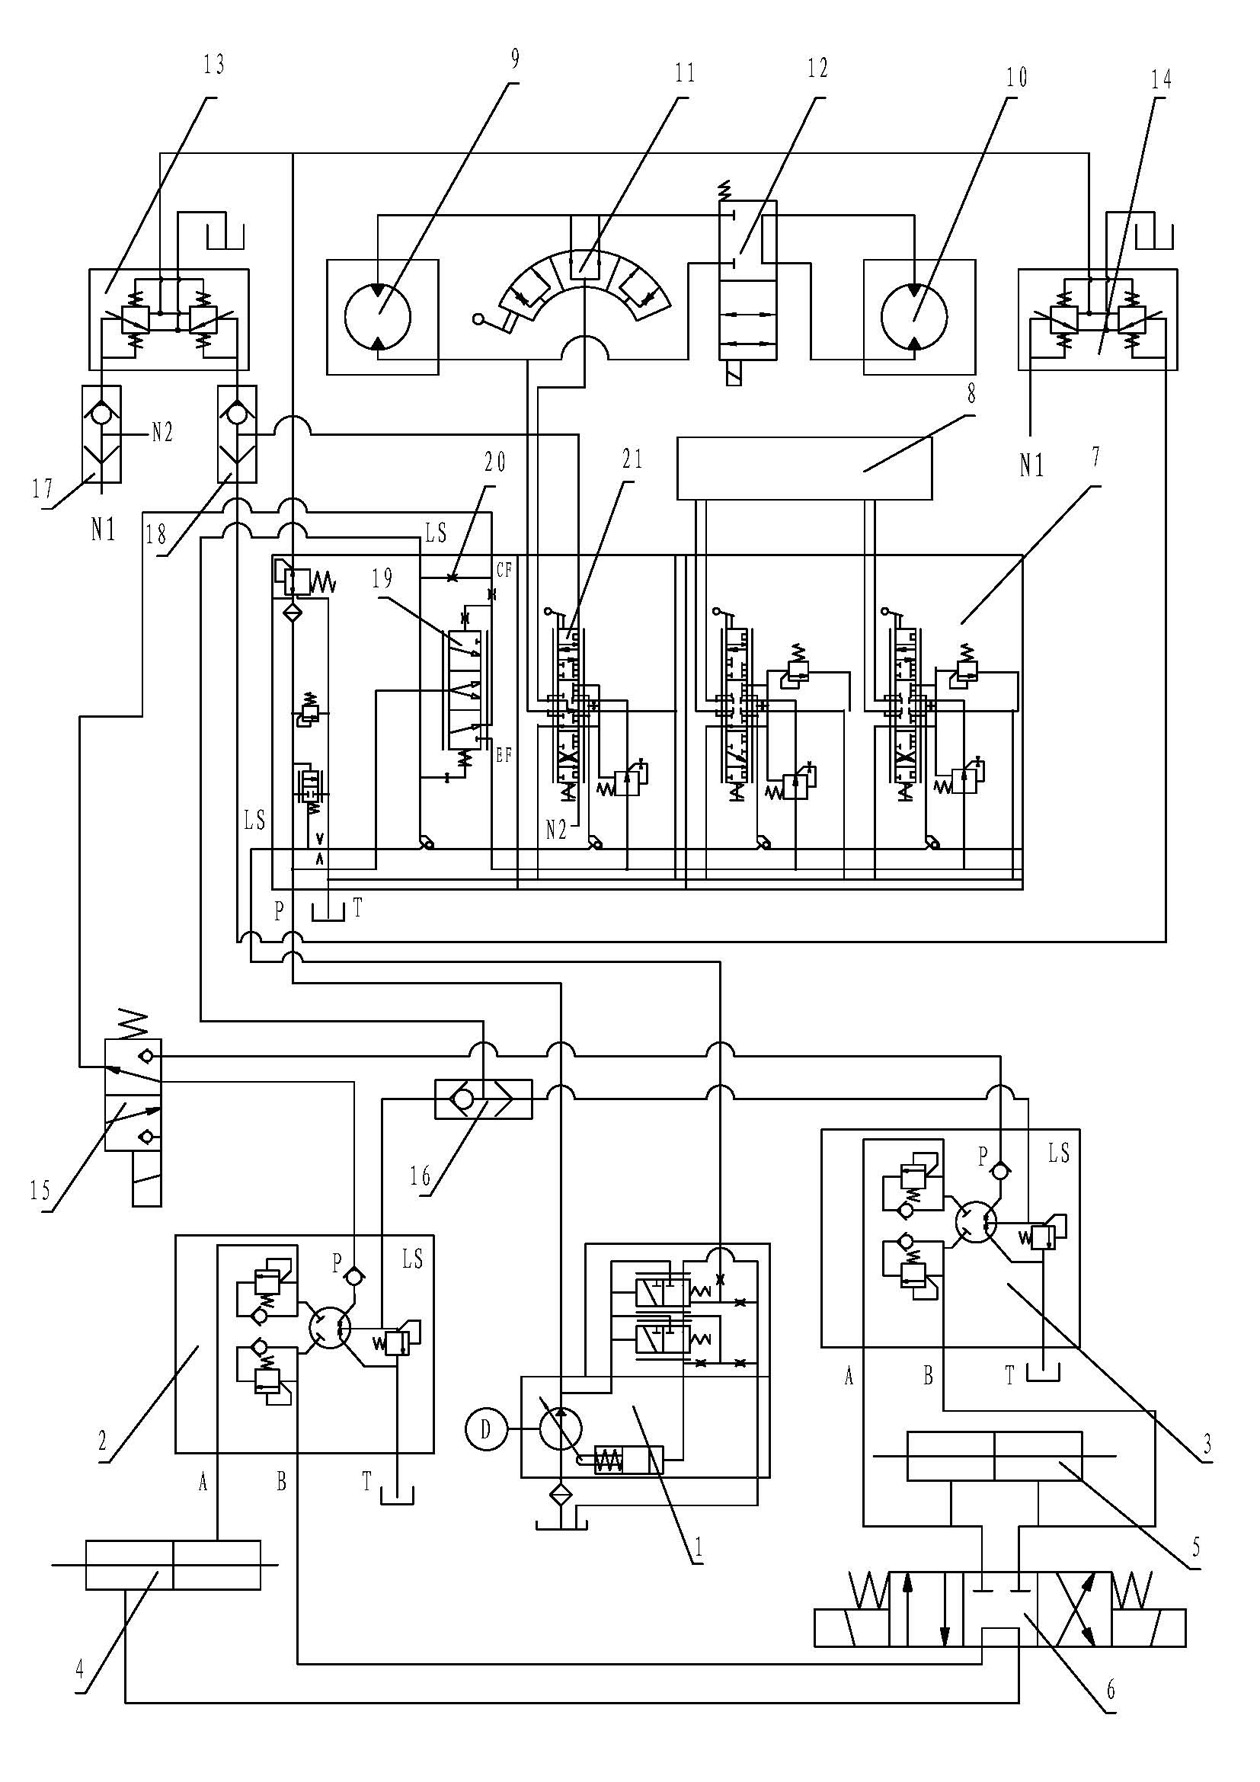 Multi-load hydraulic sensing system for single-power source and multi-system working